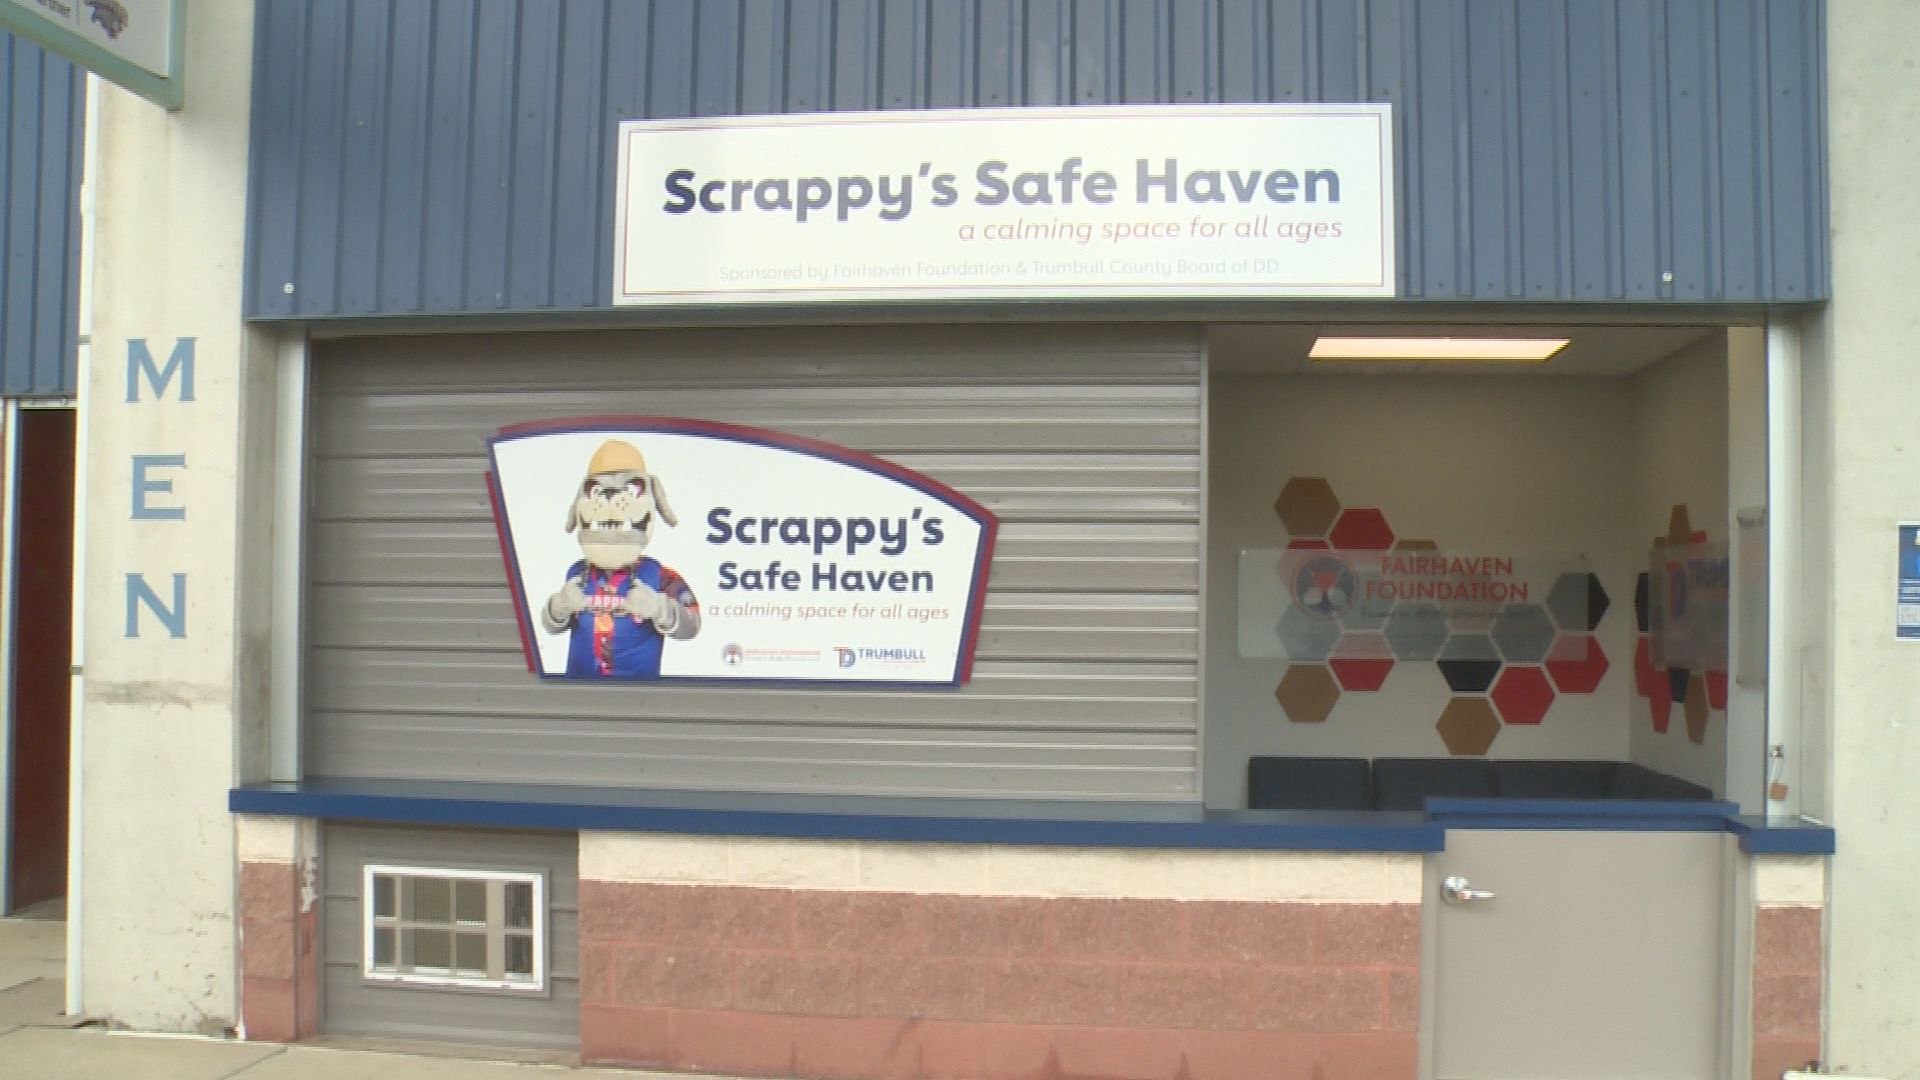 Scrappy’s Safe Haven provides new calming space at Eastwood Field [Video]